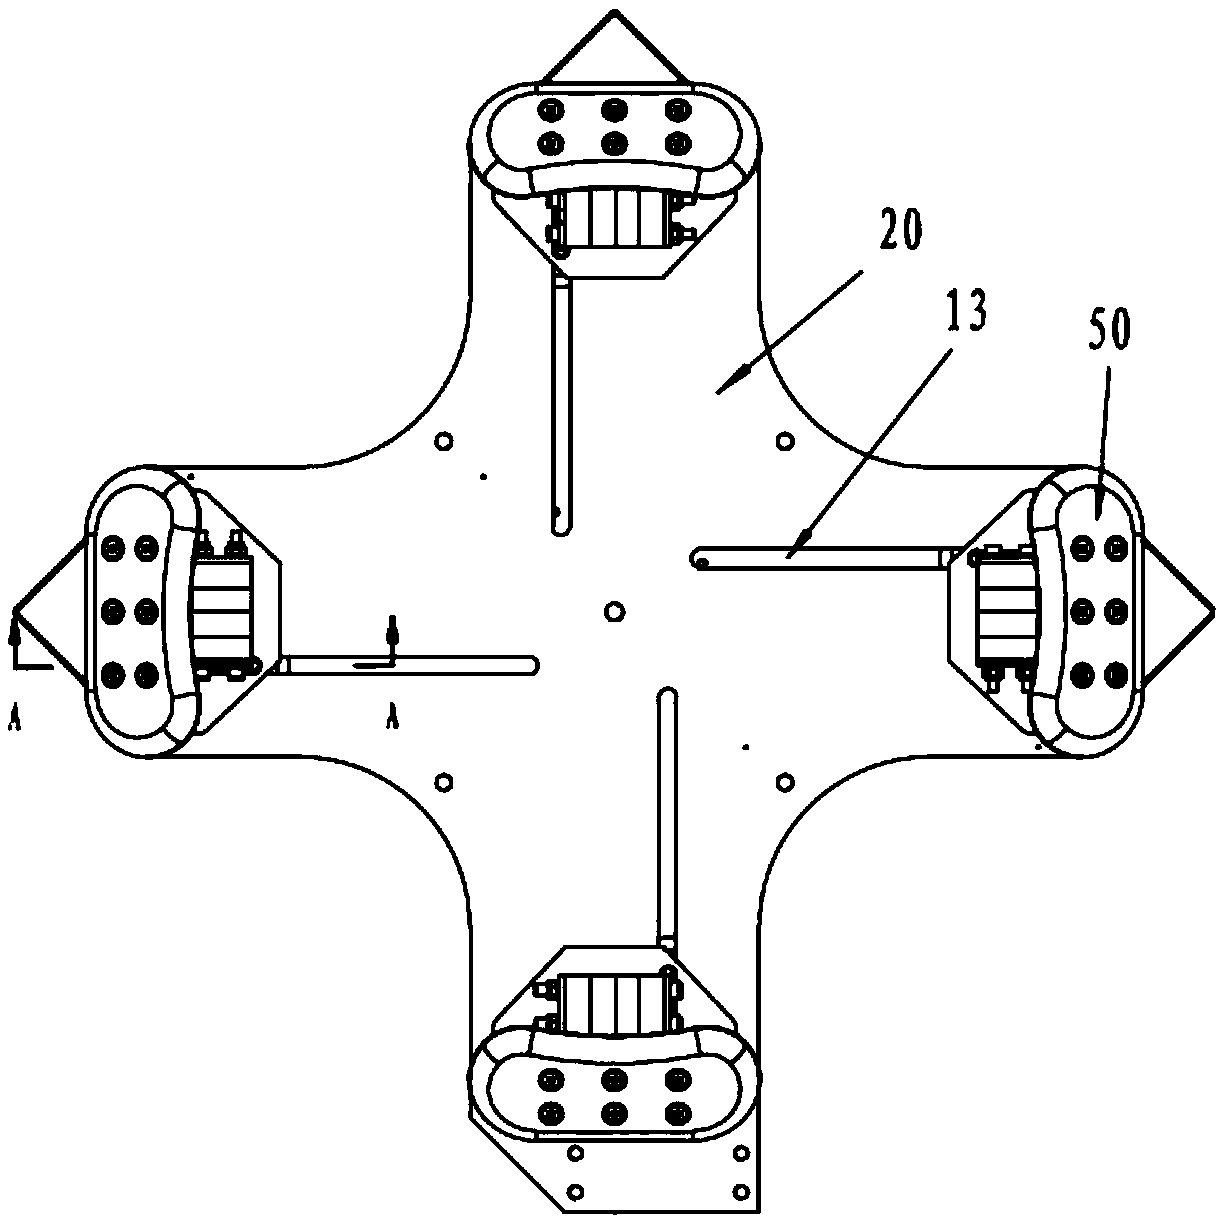 Clamping linkage mechanism and claw disc